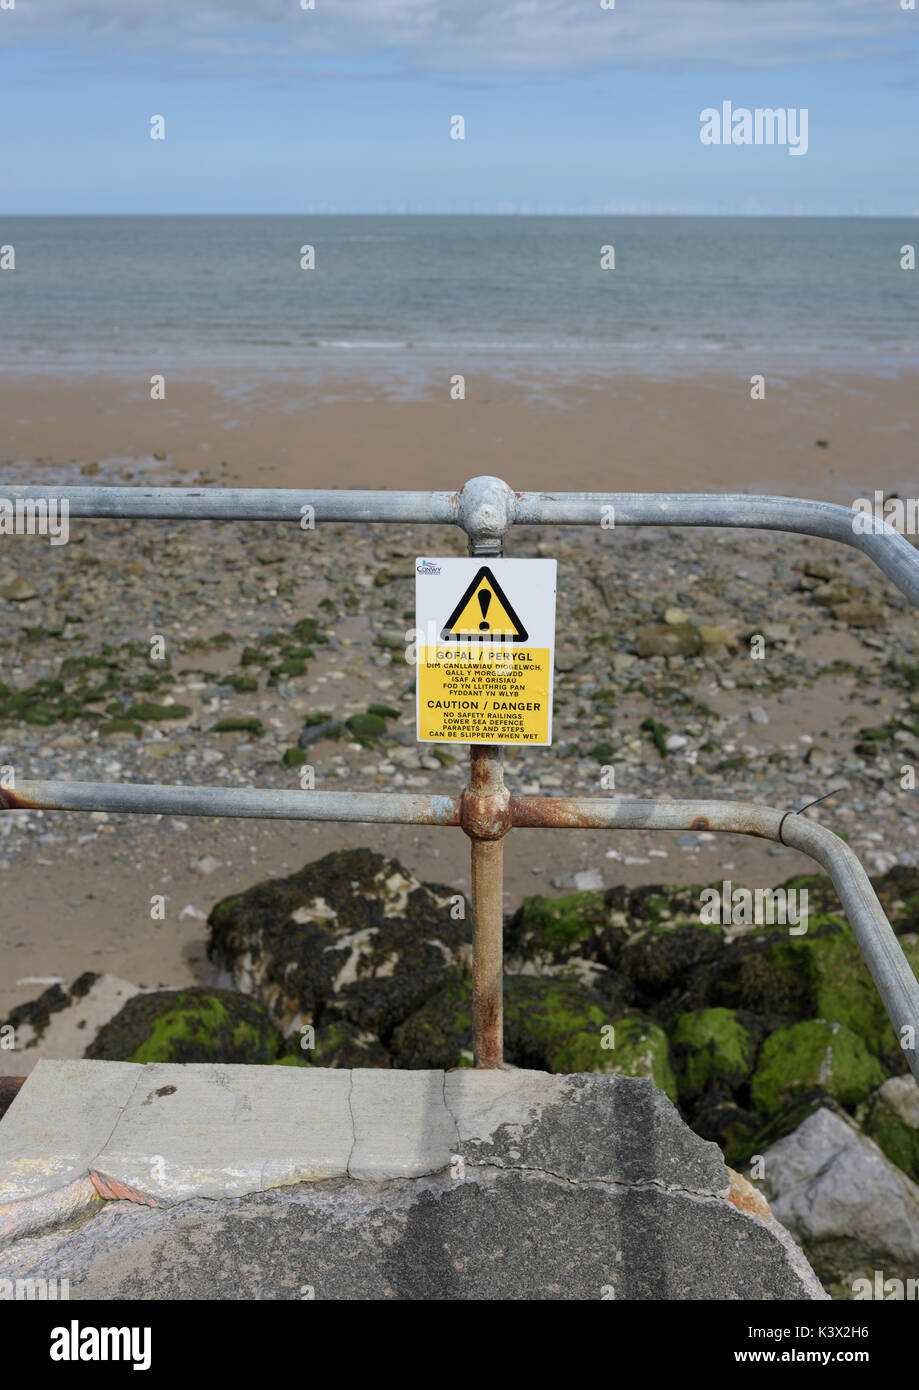 Corroded handrail risk warning sign and warning sign overlooking beach in north wales uk Stock Photo